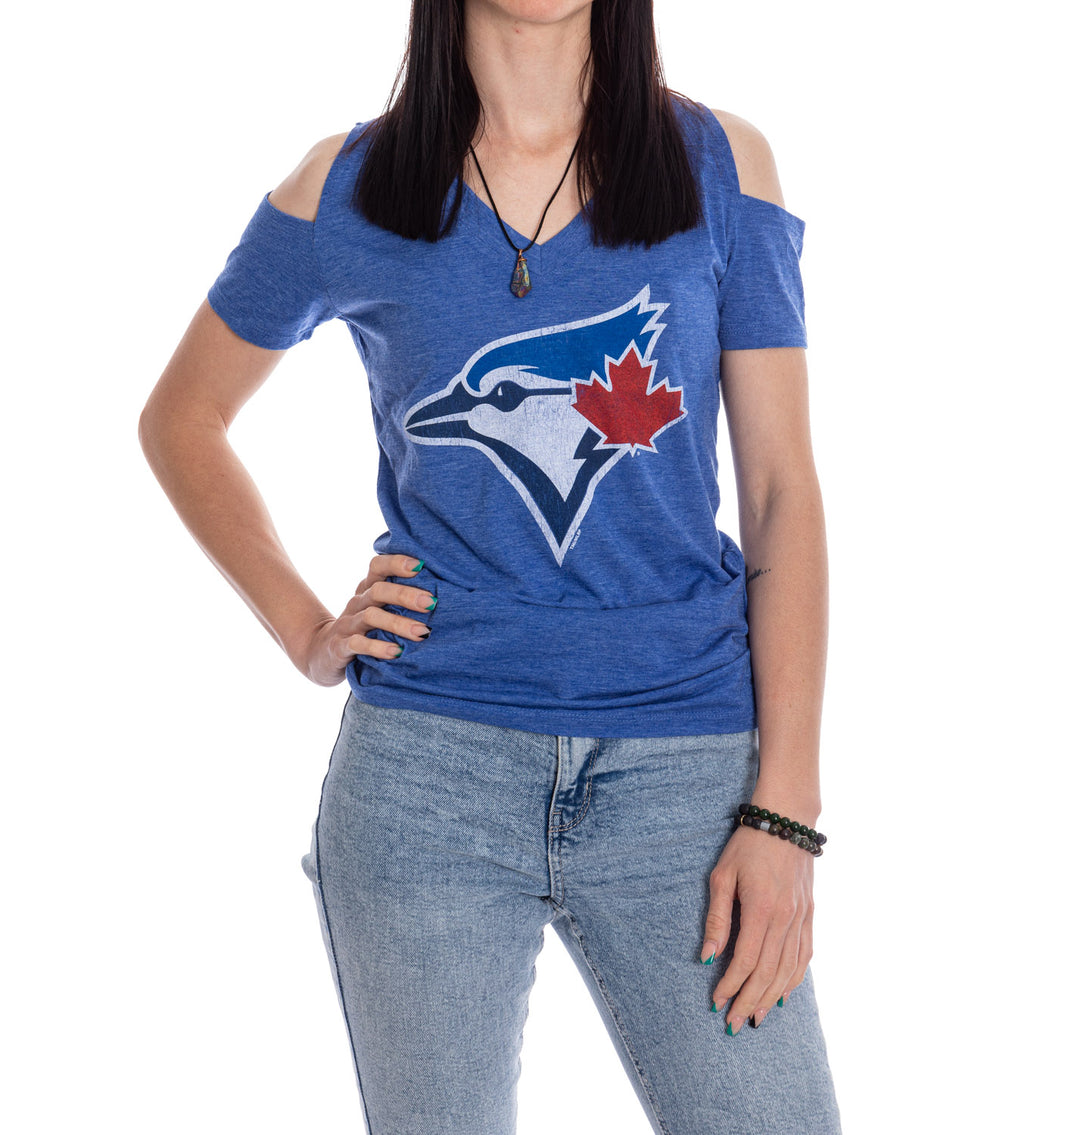 Cheer on the Blue Jays this summer while looking stylish in this cute 'cold shoulder' T-Shirt! Made from polyester/cotton blend fabric, this lightweight shirt is super comfortable and will let you show your true Blue Jays Fandom! 